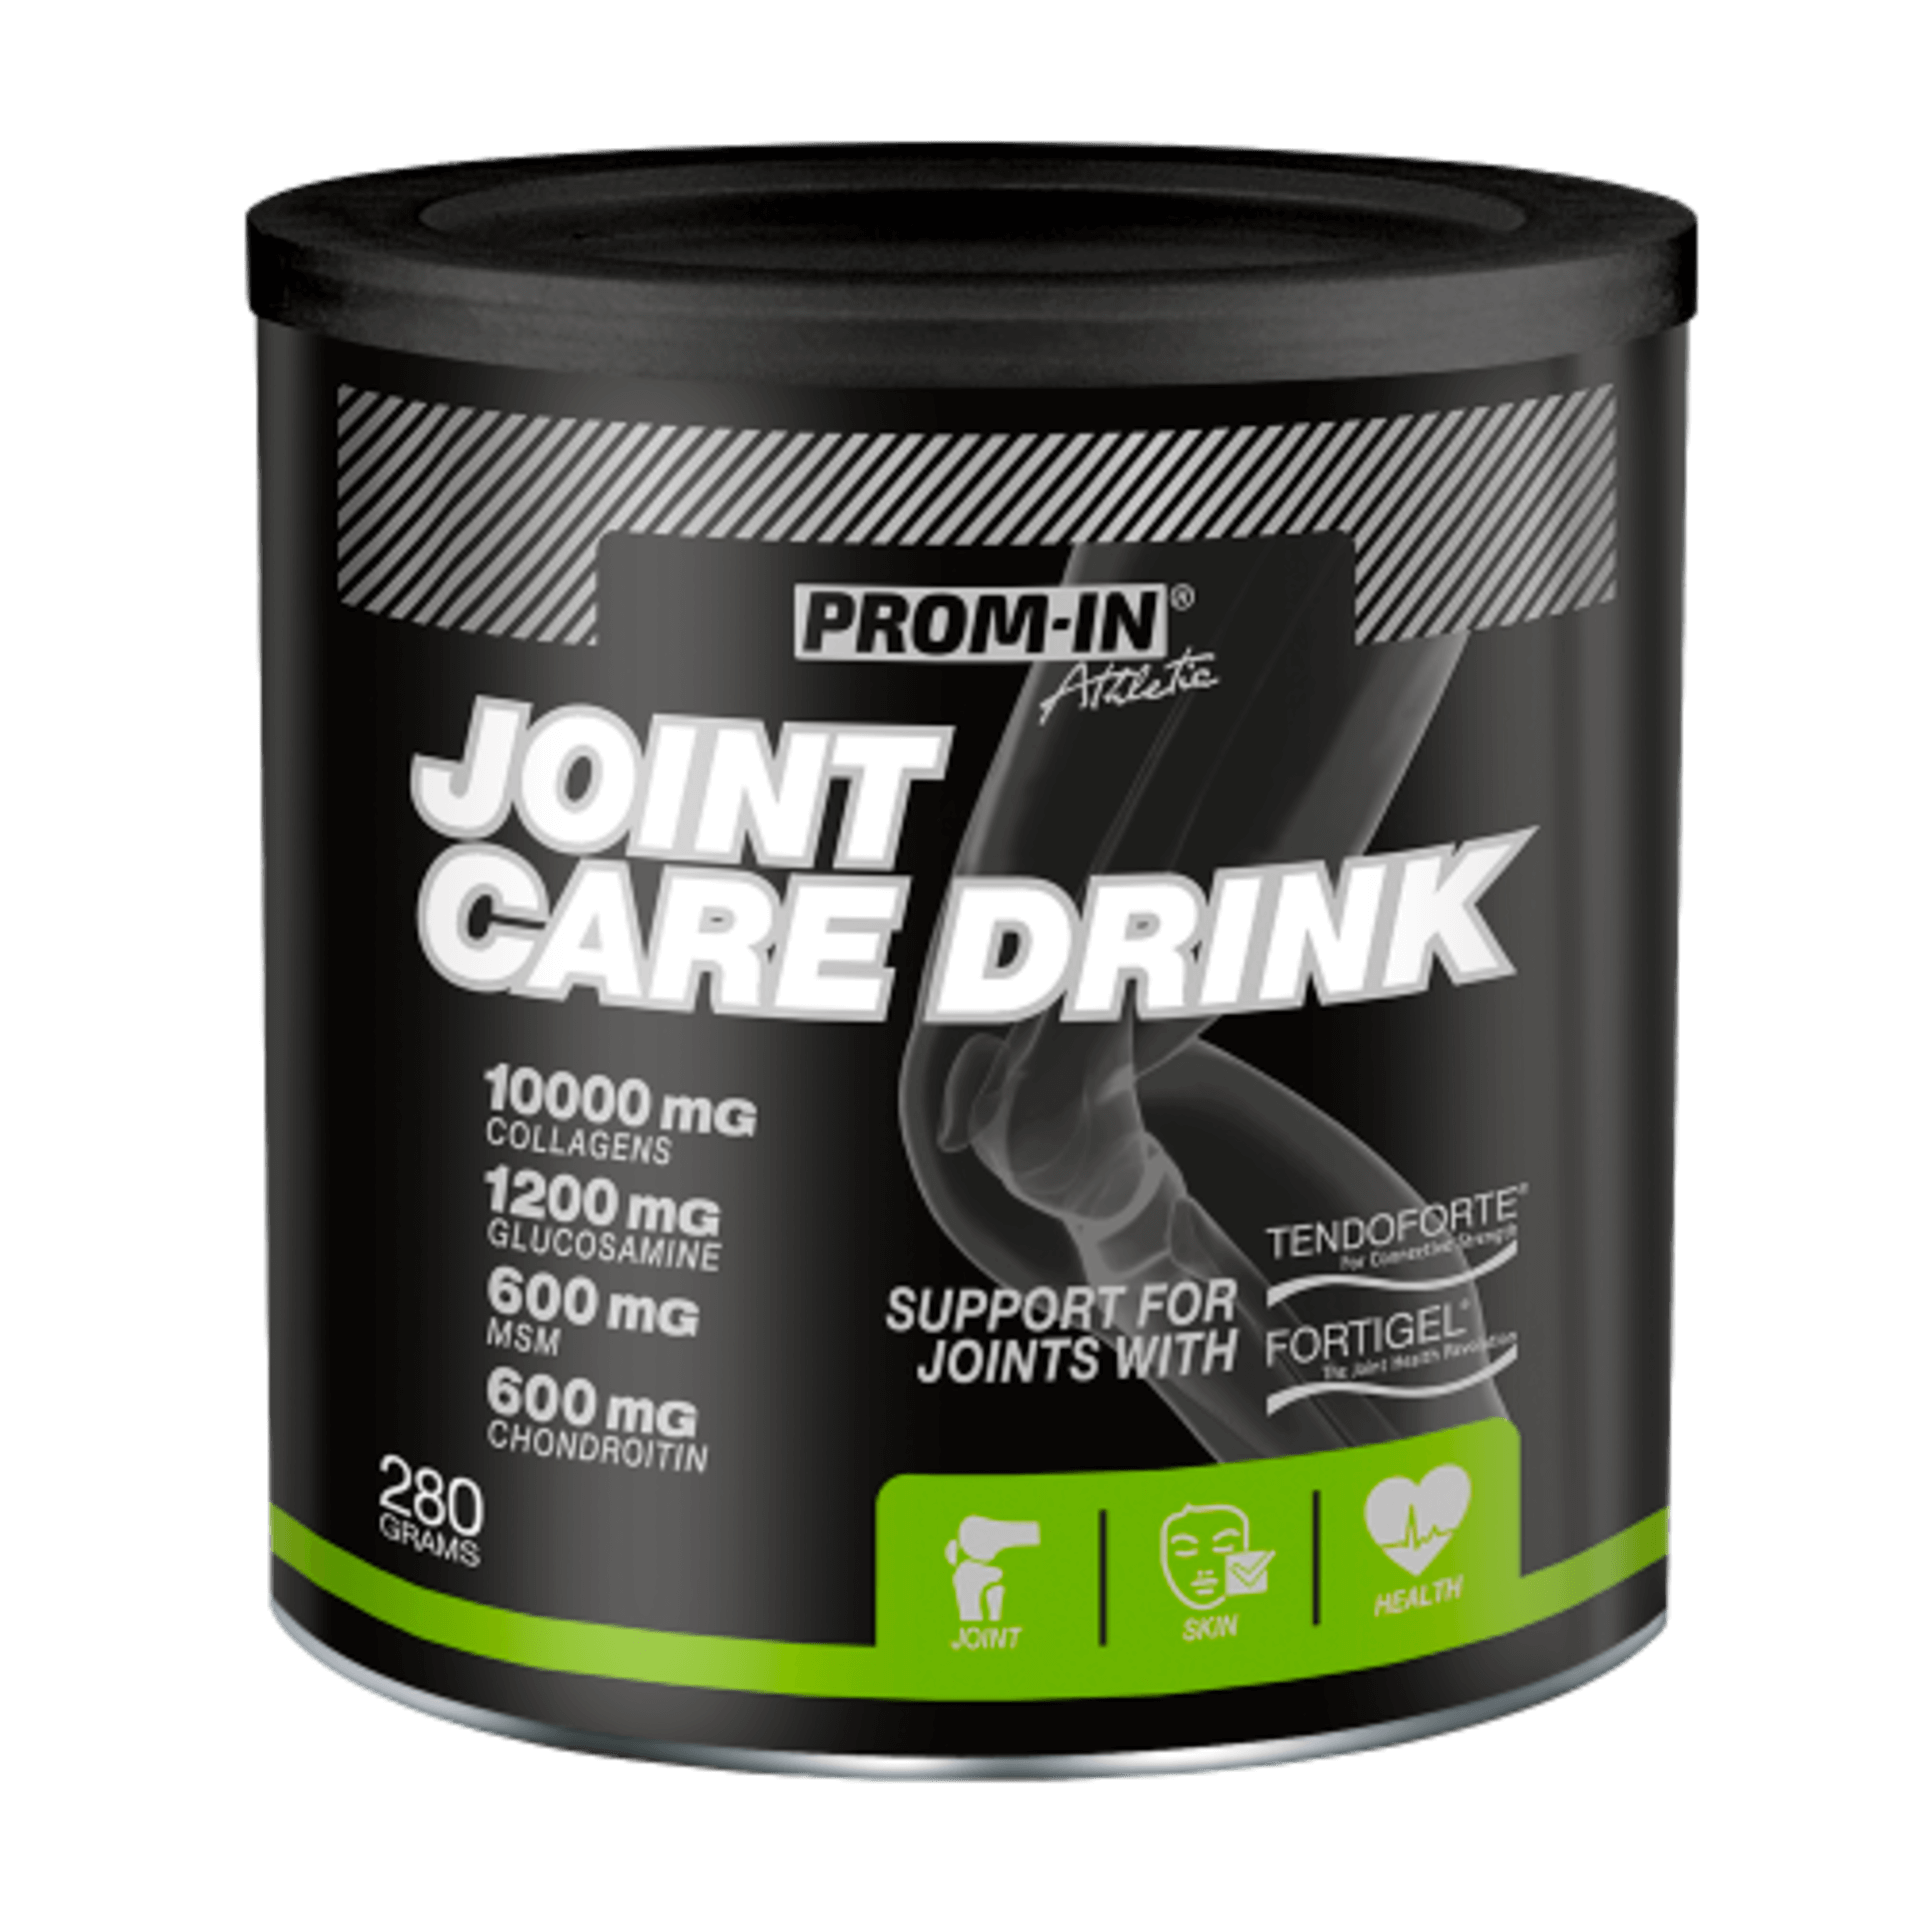 E-shop Prom-IN Joint Care Drink 280 g